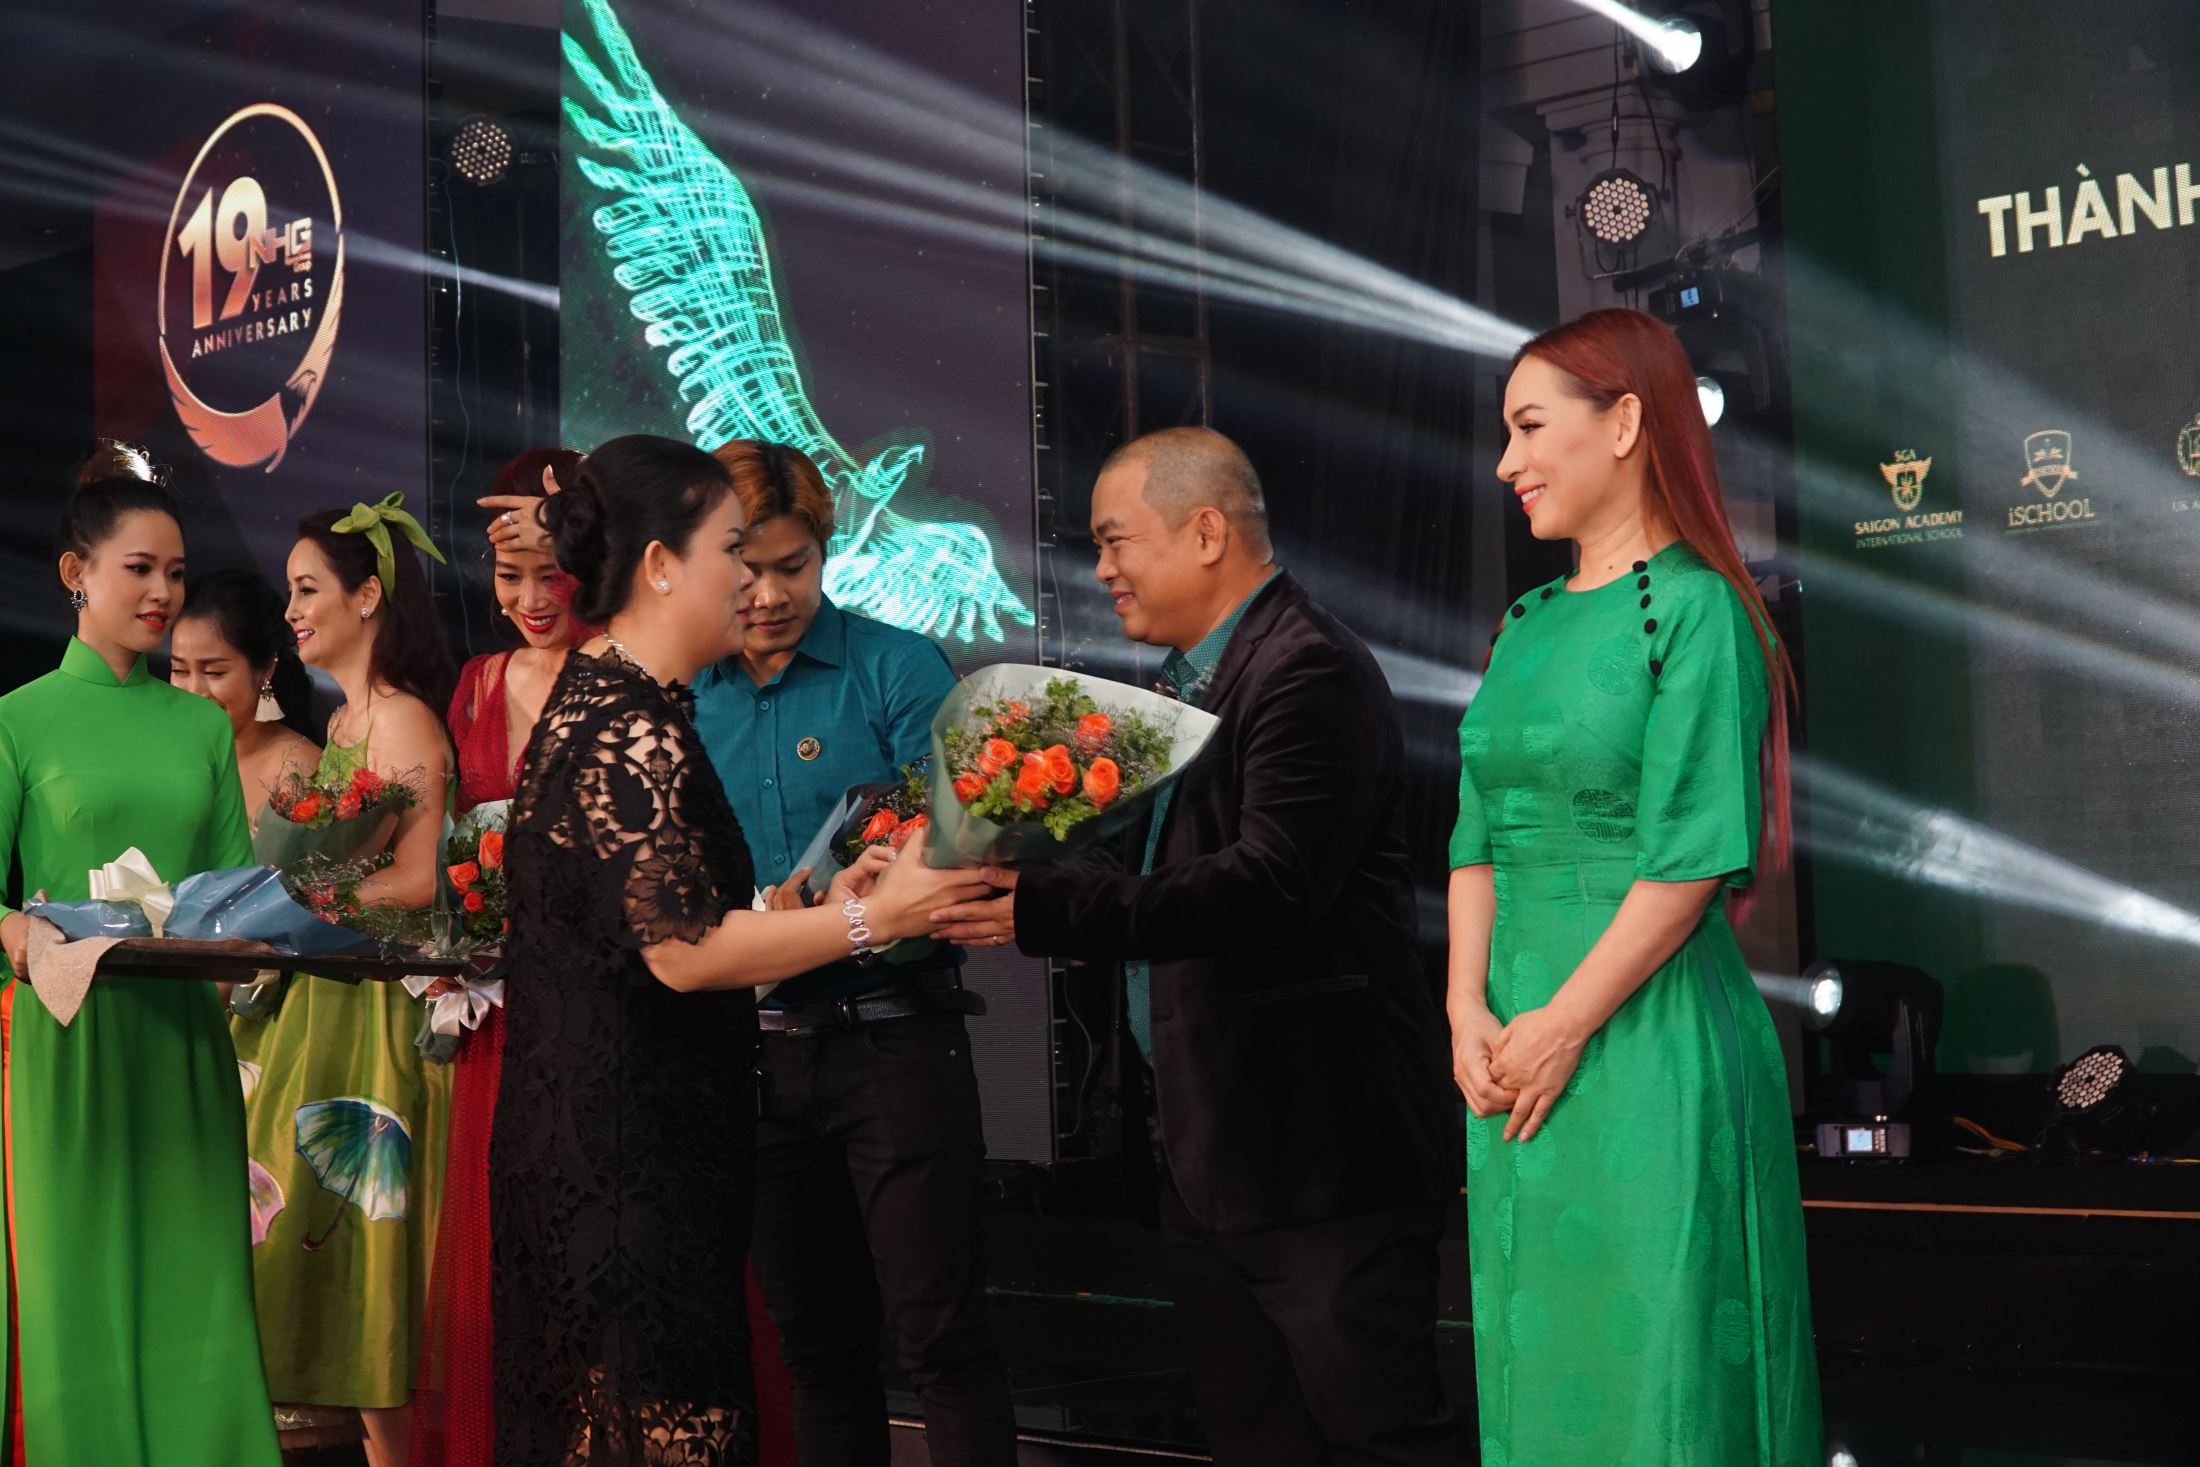 Ms. Hoang Nguyen Thu Thao gave flowers to the Judges of NHG’s Got Talent.